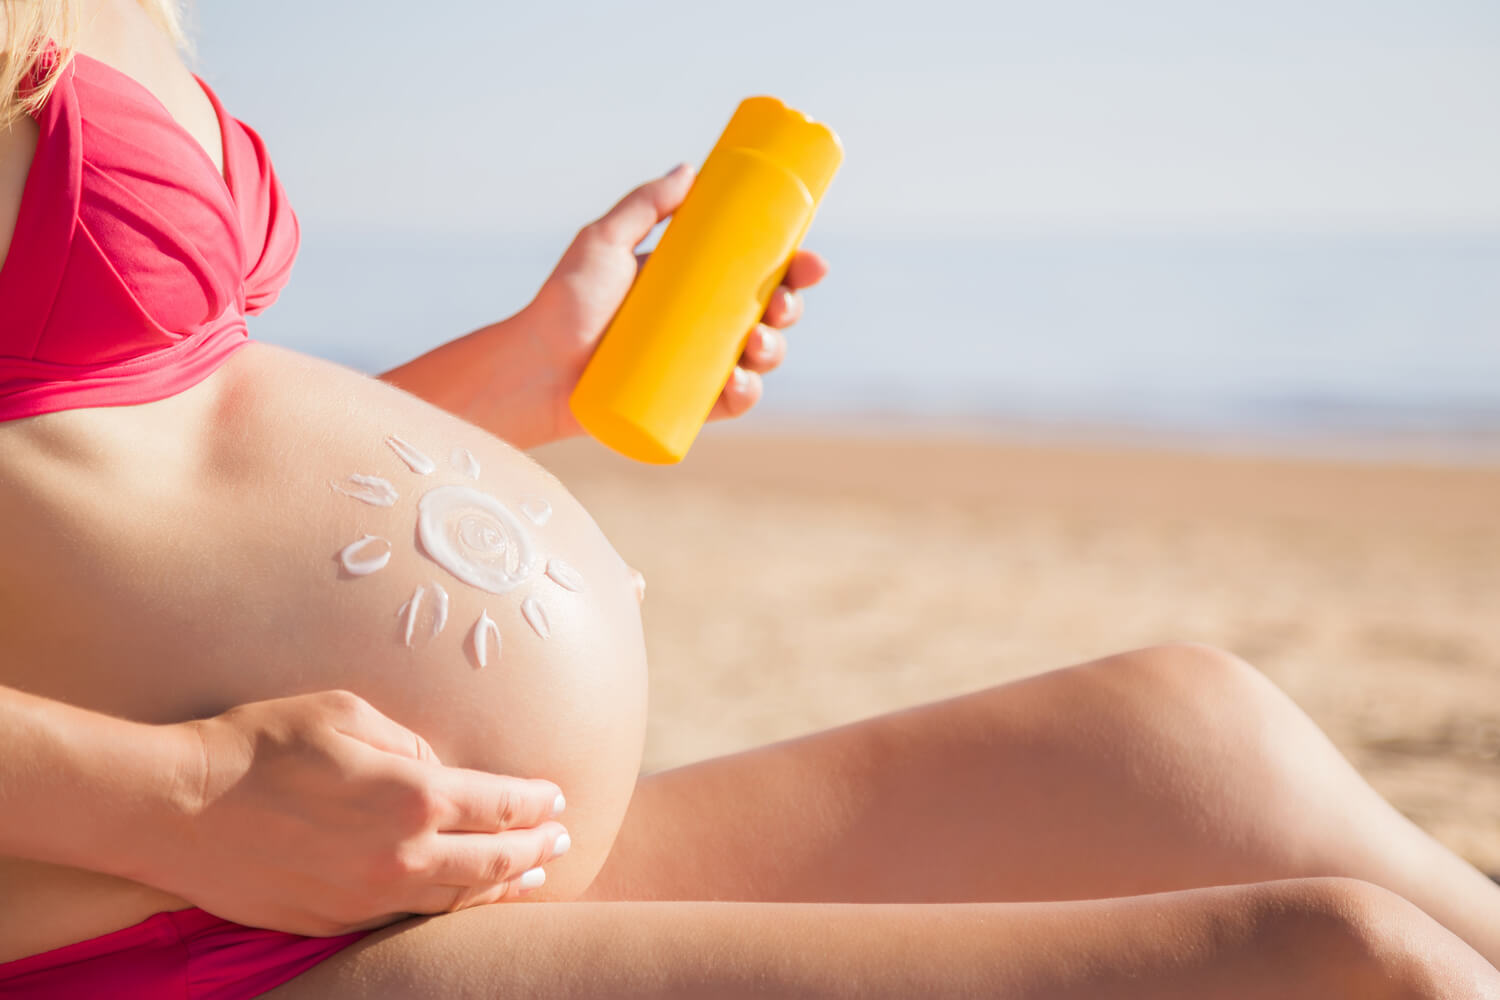 pregnant women use sunscreen lotion